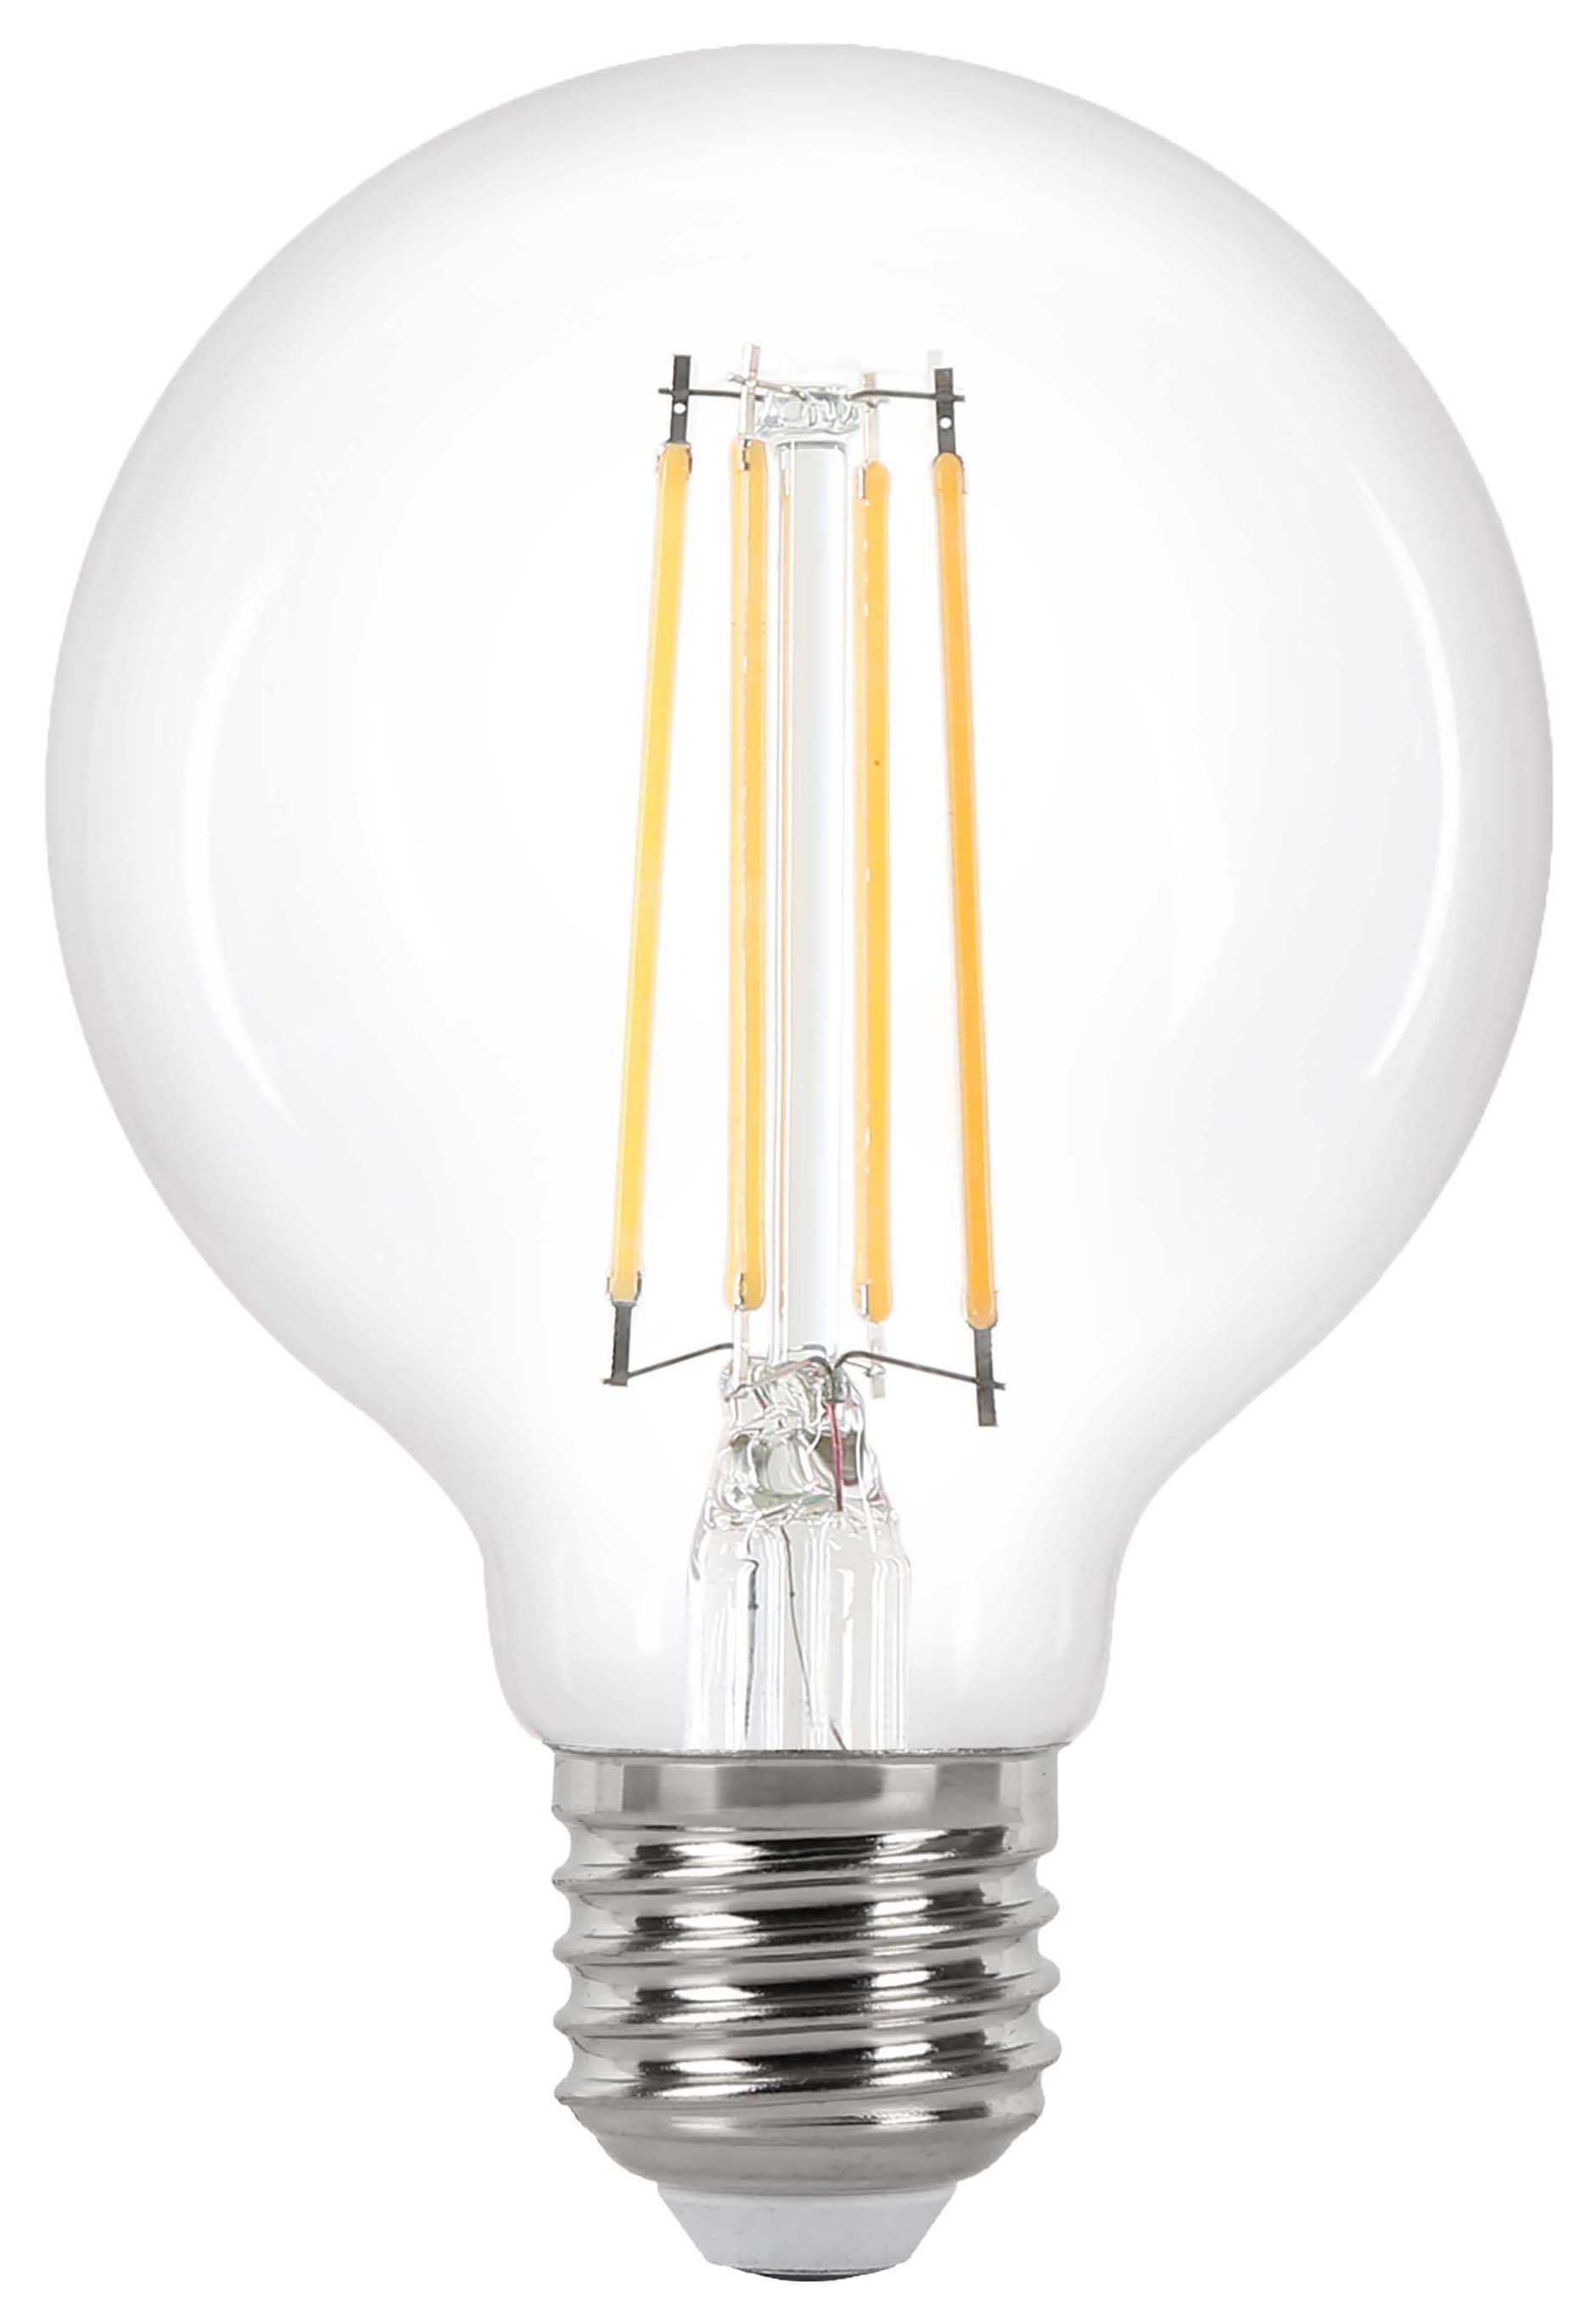 Image of Wickes Non-Dimmable Opal Globe LED E27 5.9W Warm White Light Bulb